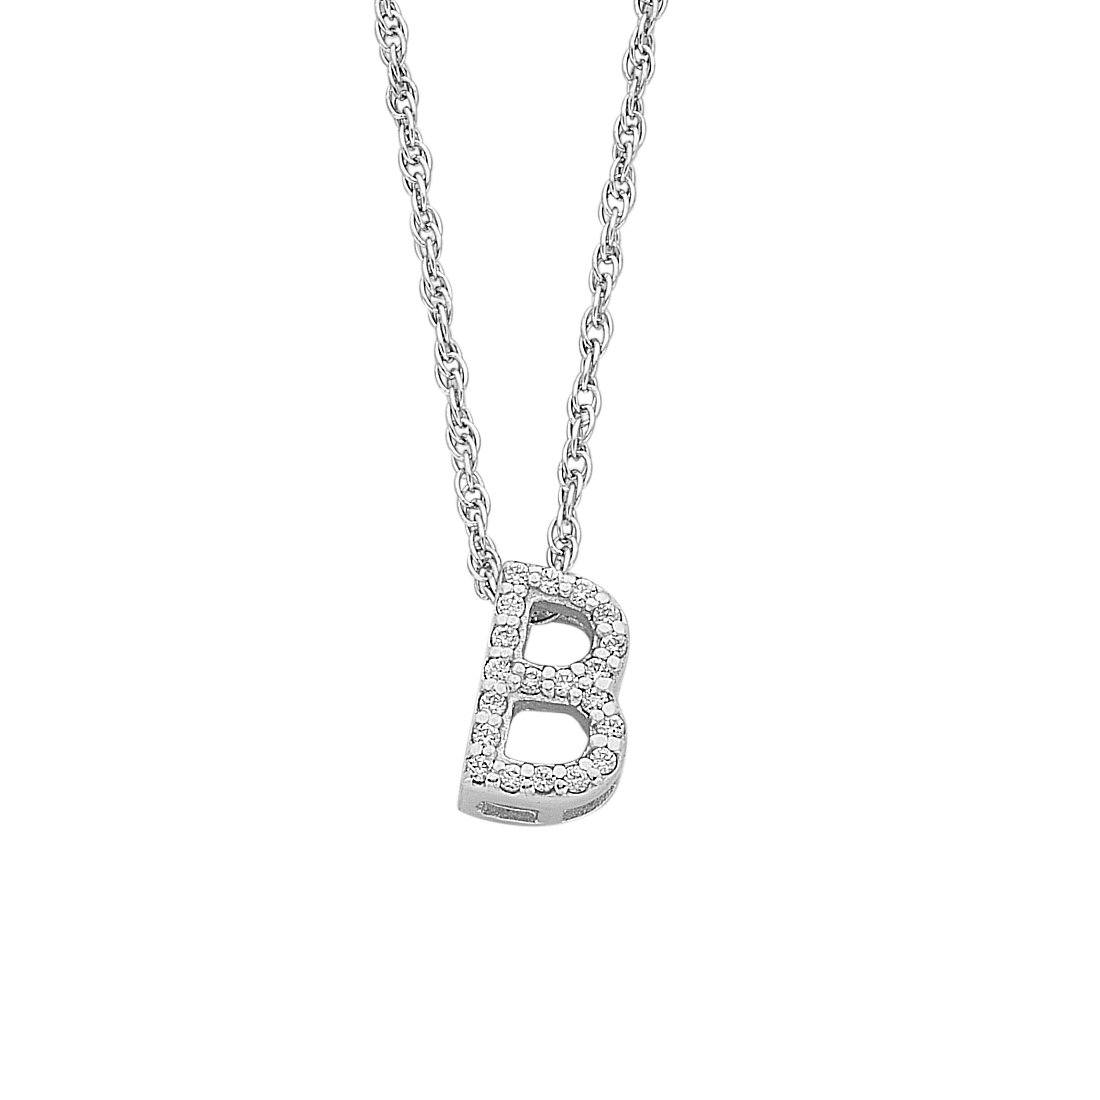 Sterling Silver Cubic Zirconia Initial Necklace Necklaces Bevilles 